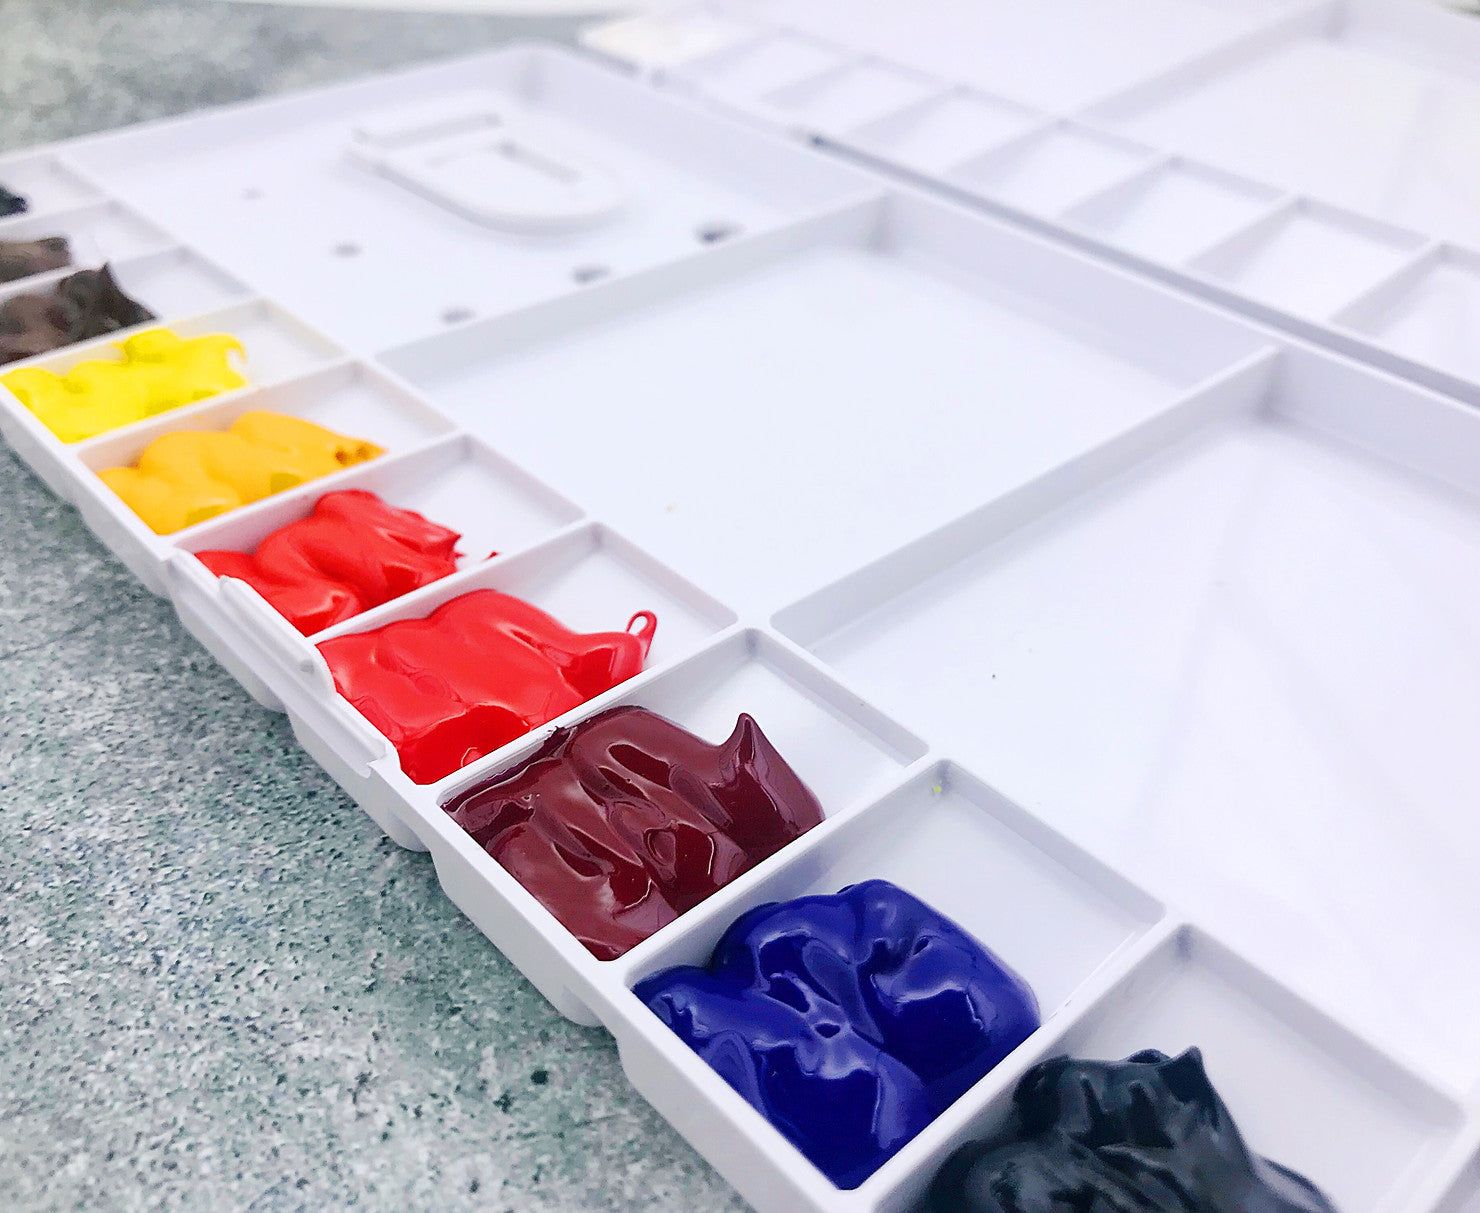 How to Make a Watercolor Palette